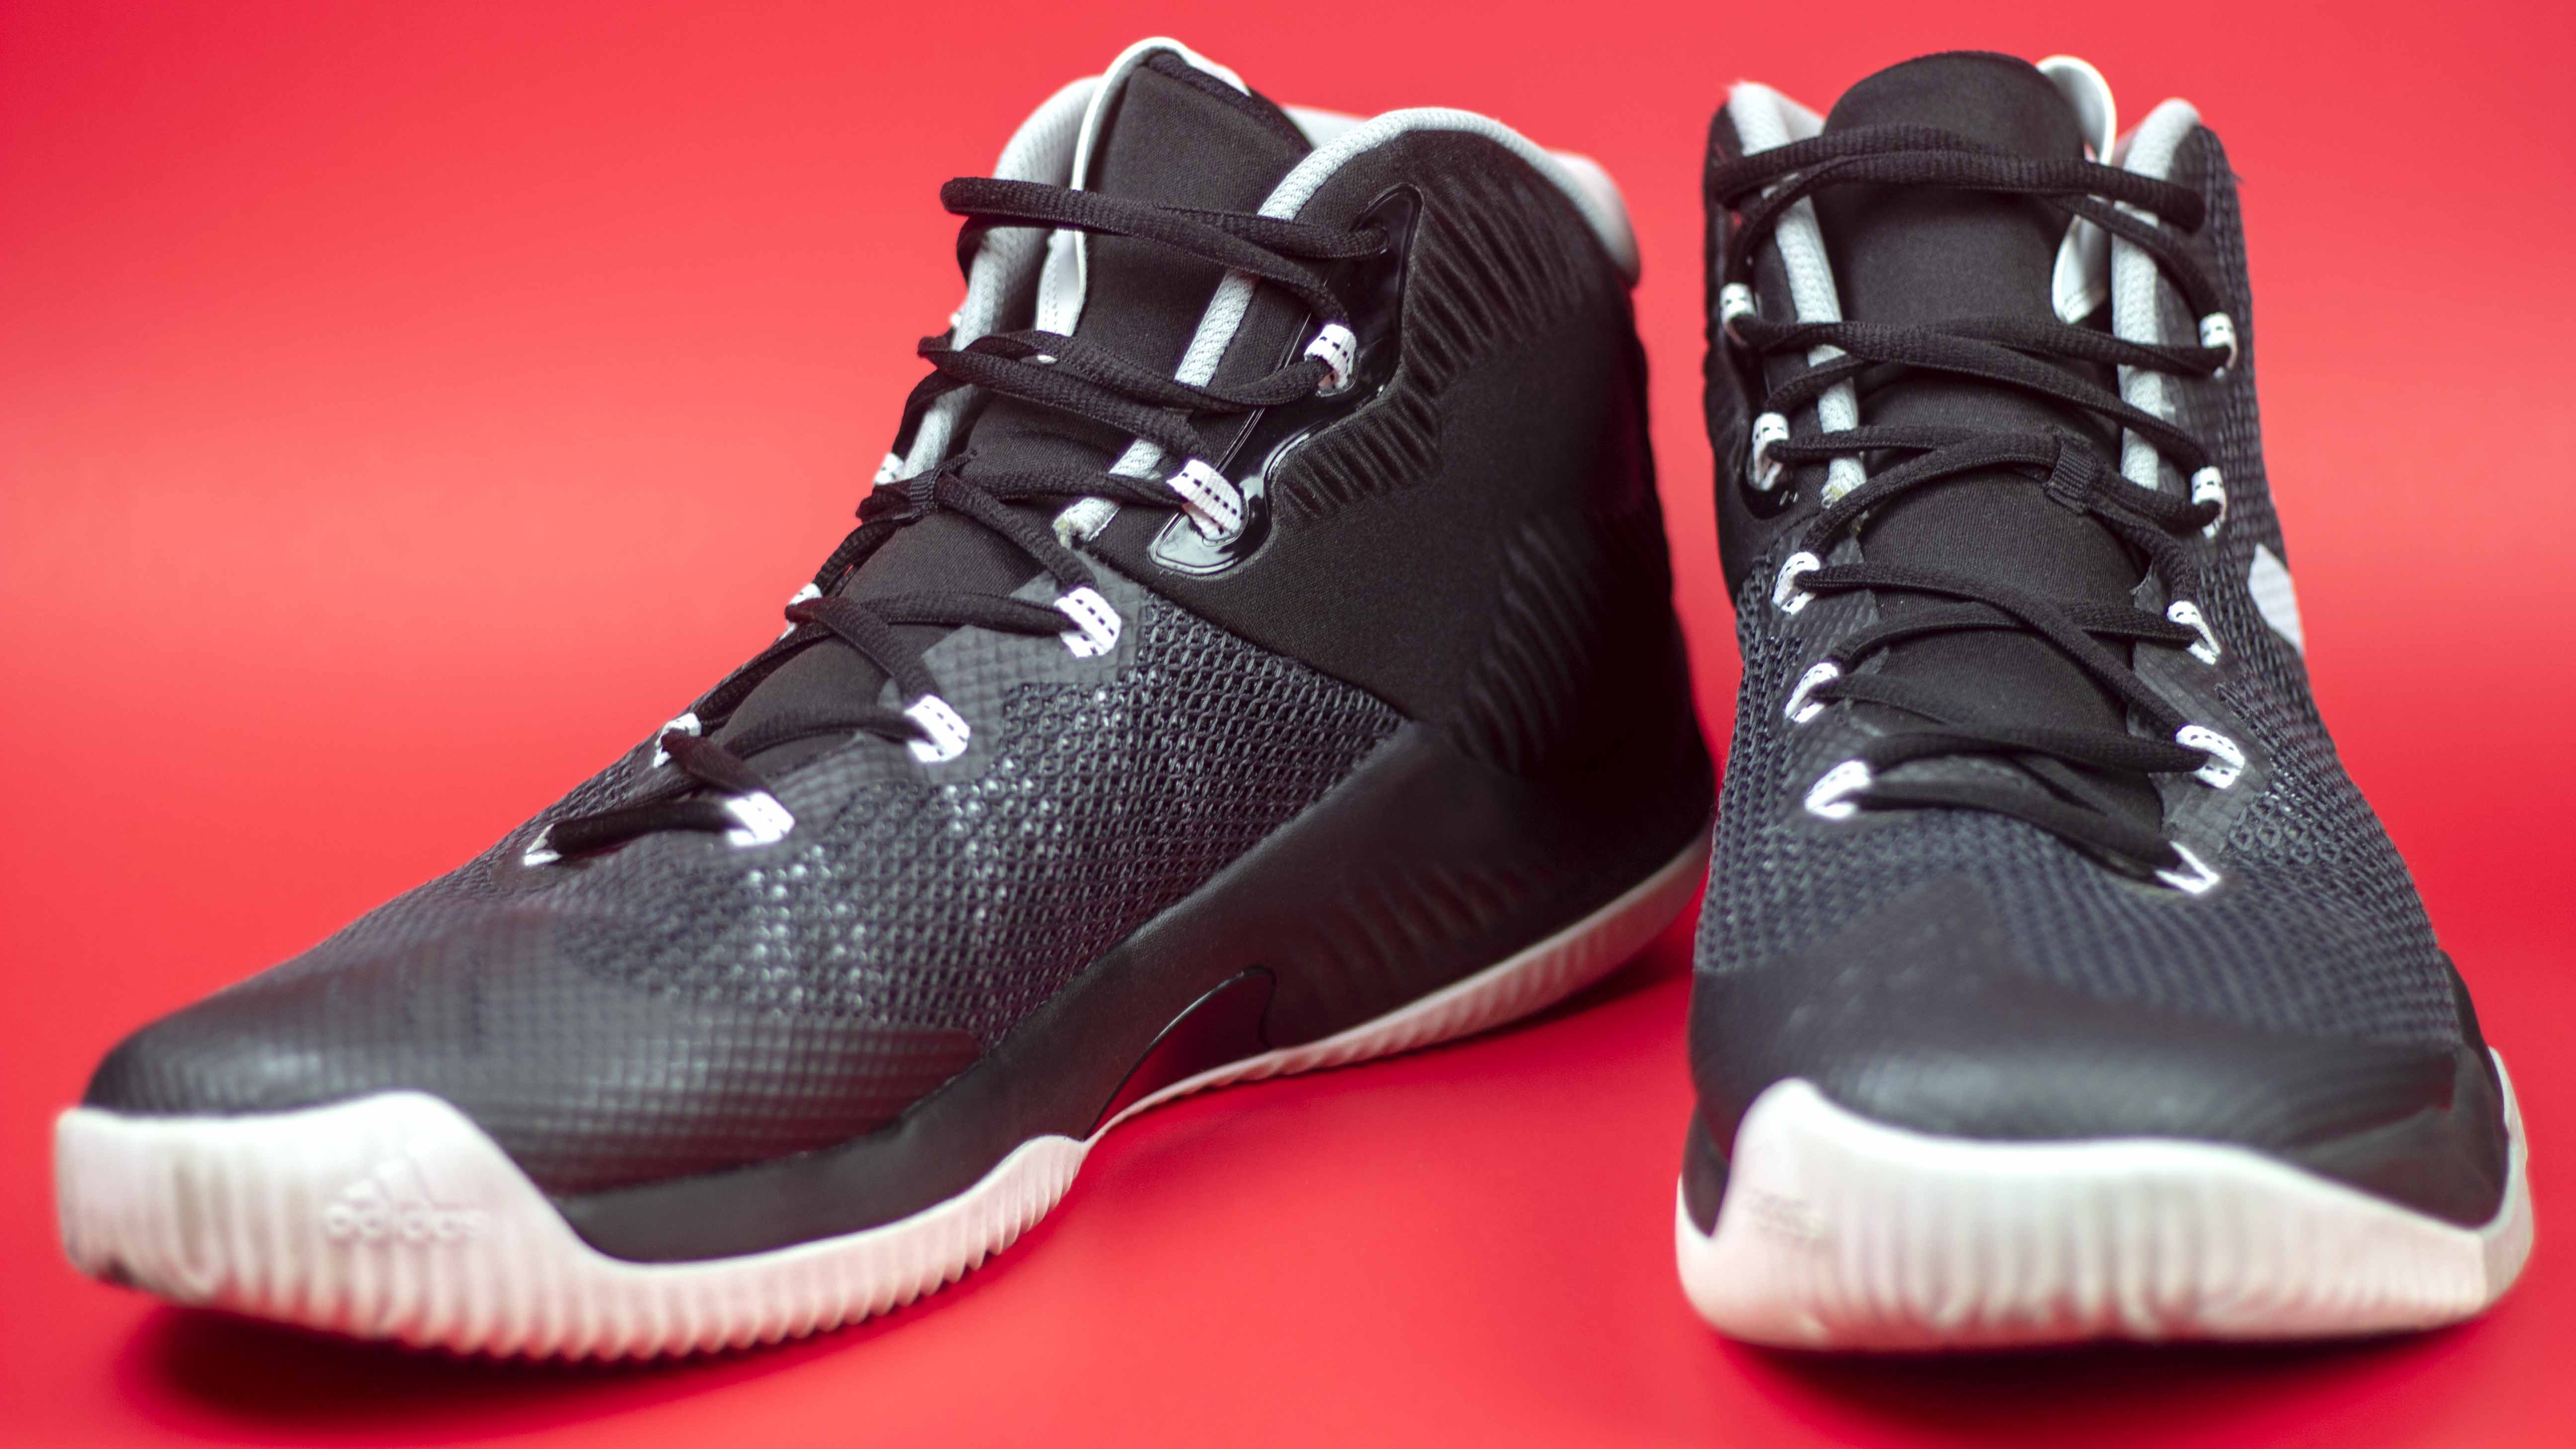 Buy Adidas Crazy Hustle - Only $62 Today | RunRepeat